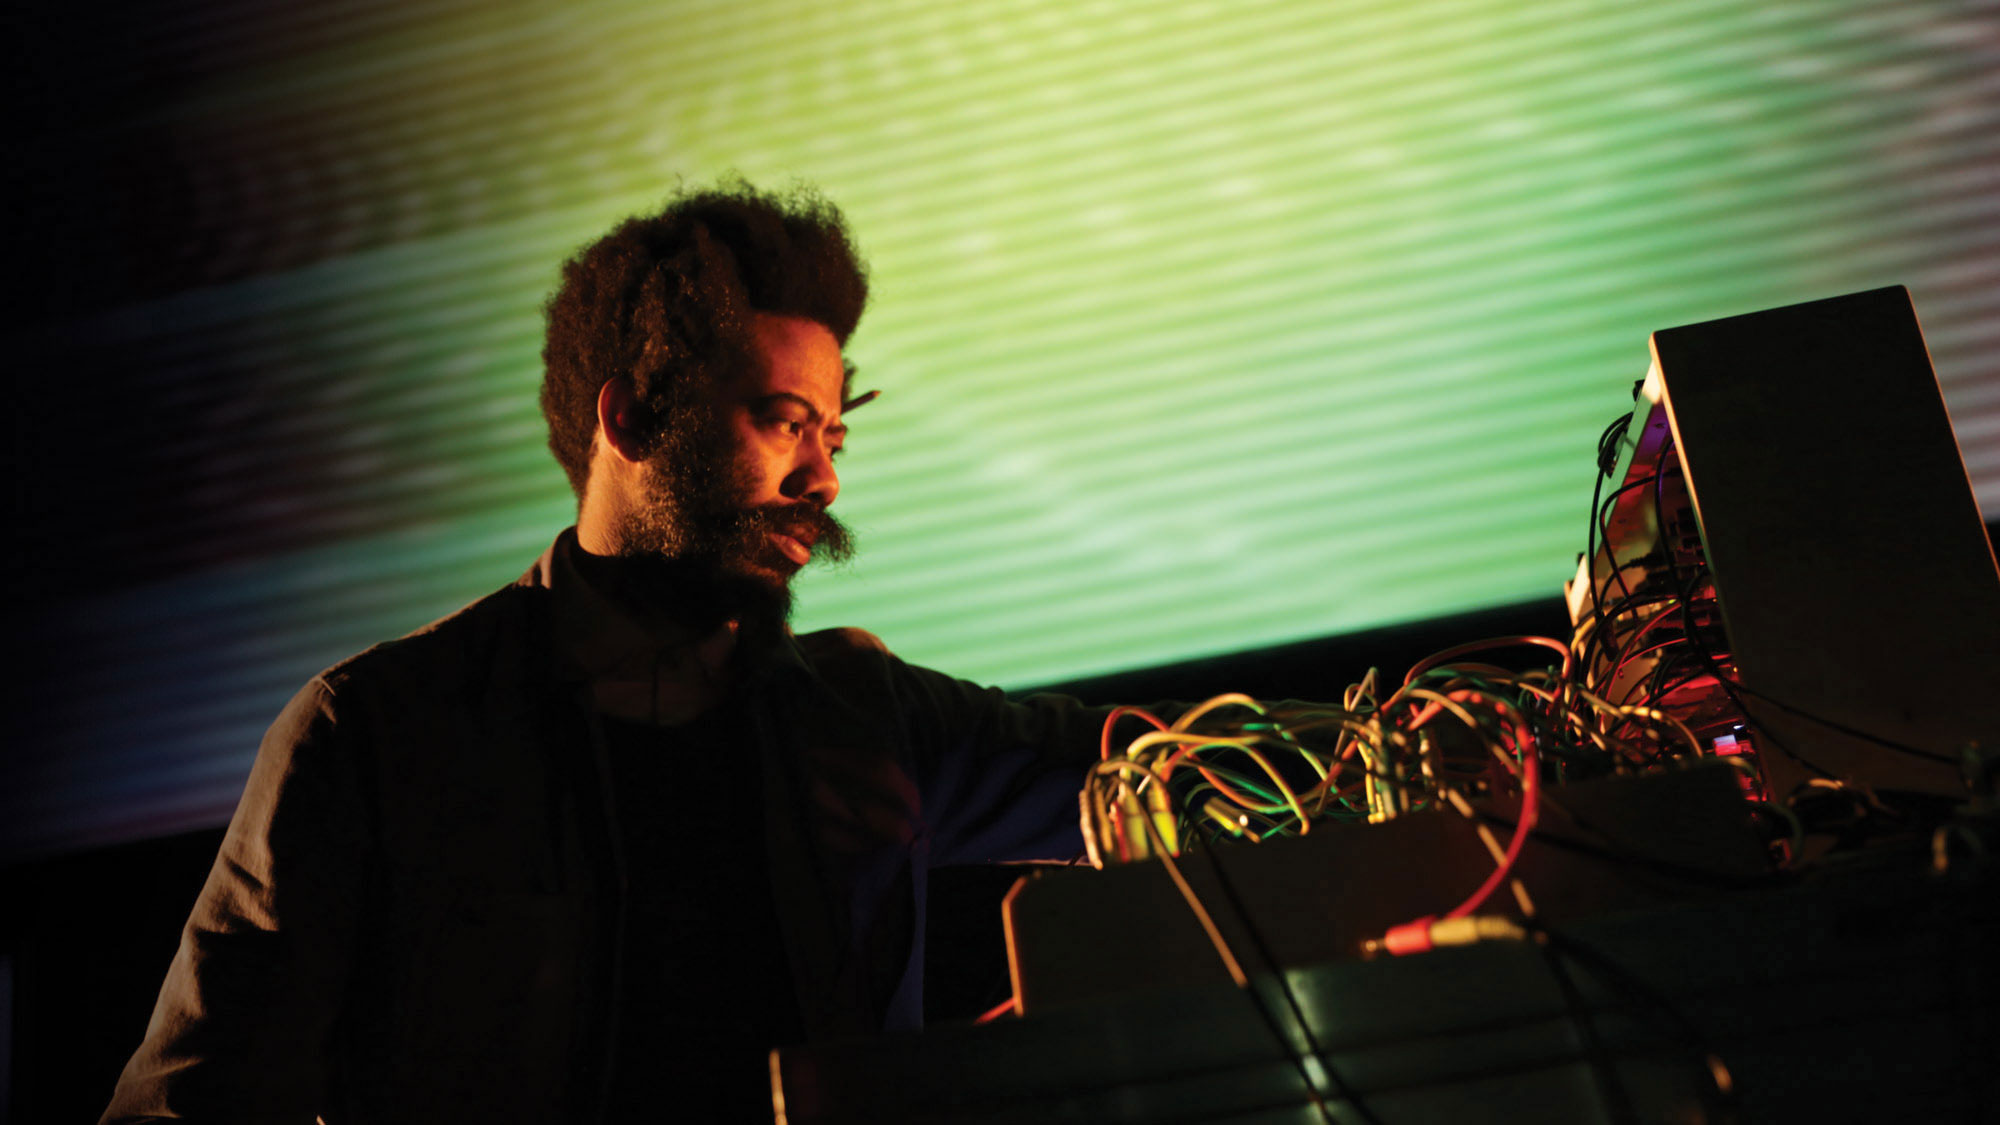 A Black man with a prominent mustache in front of a green and yellow projection examining various colored wires. 